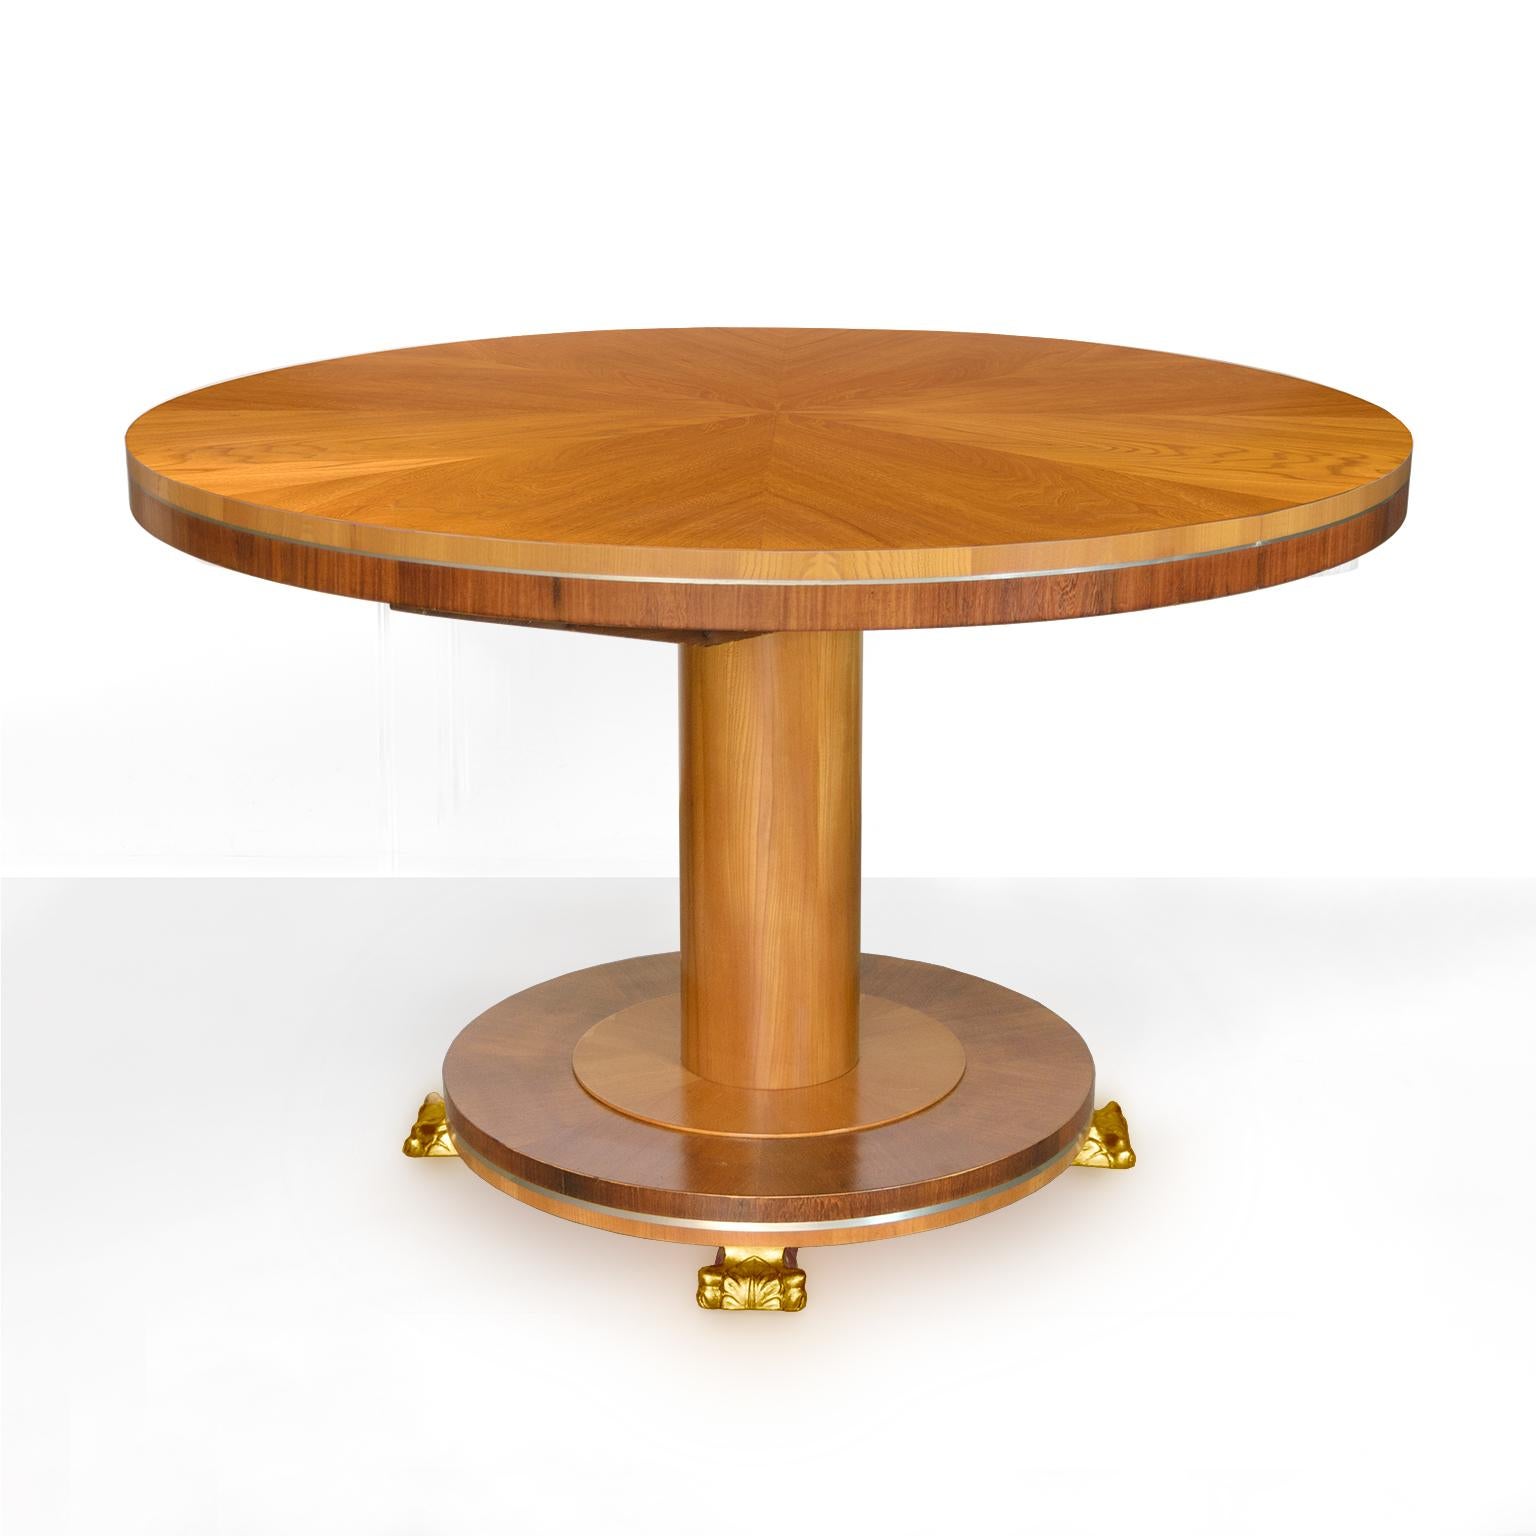 Rare Swedish Art Deco dining table (has 4 matching chairs sold separately) by architect Carl Bergsten. Masterfully crafted table is veneered in elm, mahogany and detailed with pewter inlay and carved gilt-wood feet. Table expands but has no leaves.